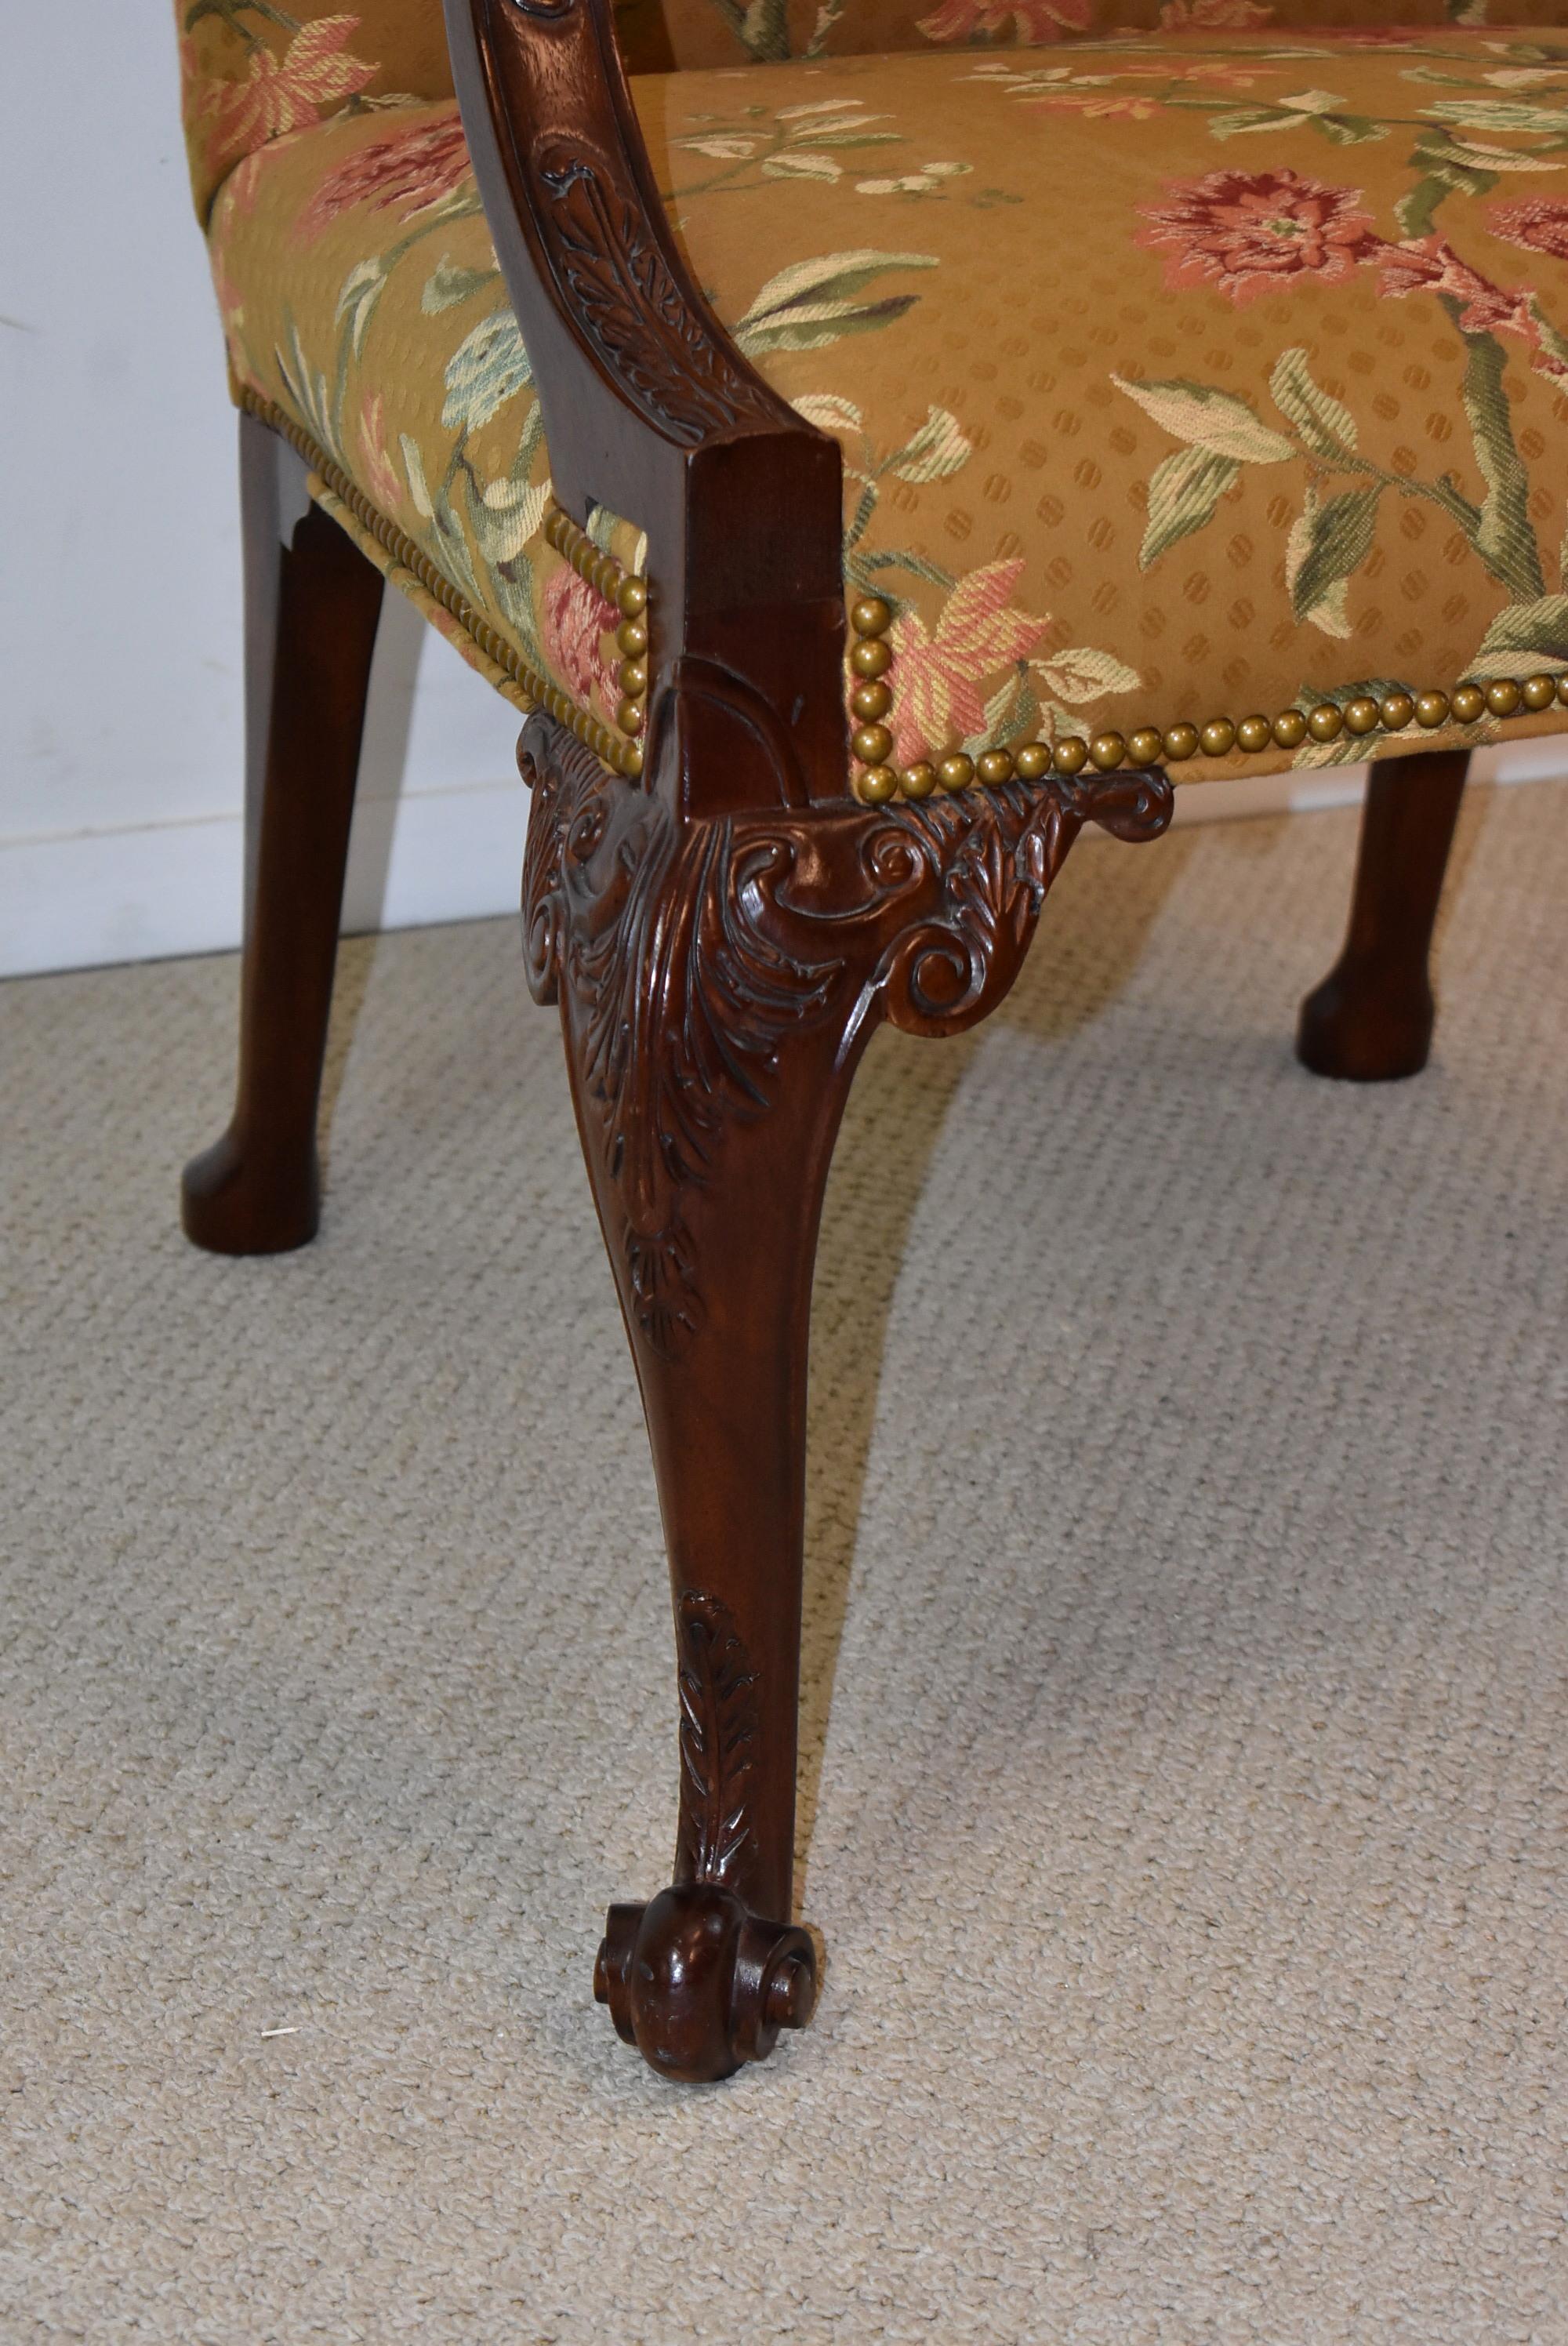 Baker Gainsborough chair Stately Homes collection 5033. A Gainsborough chair with an upholstered back and a serpentine crest. Arms terminating in carved medallions. Carved cabriole legs with whorl foot. Nail trim. This chair is upholstered in a dark